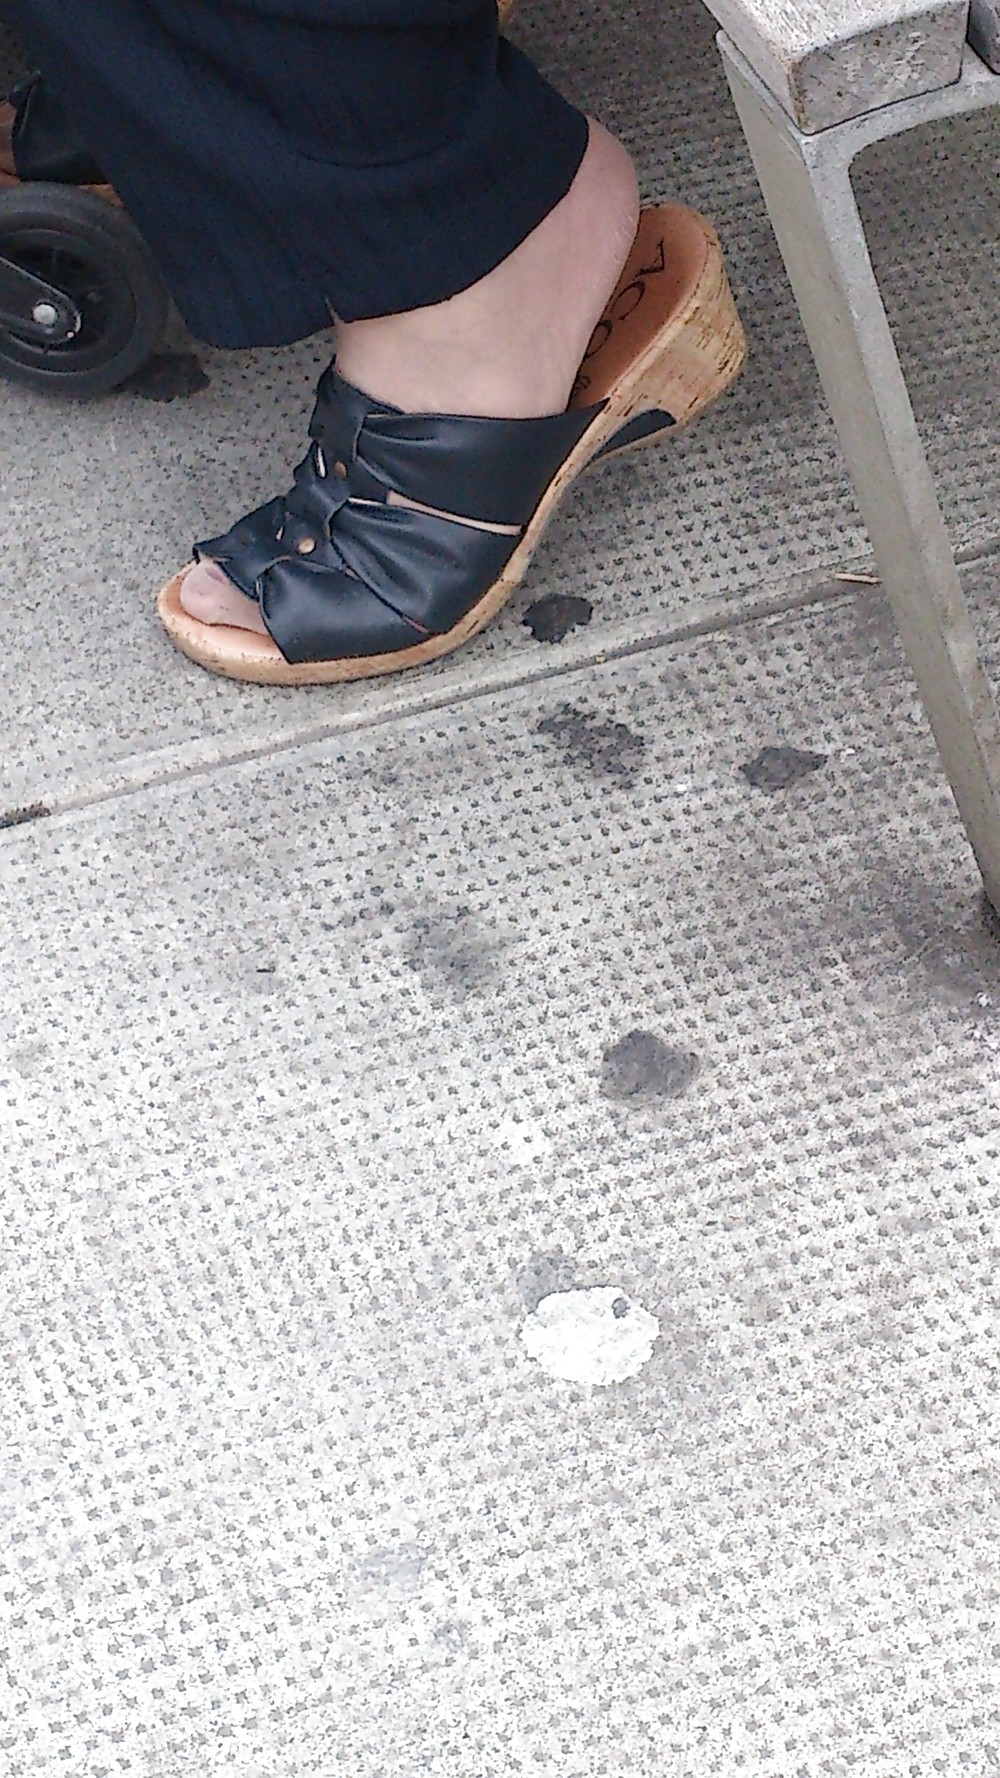 Feet in the city: Part 12 #21302822